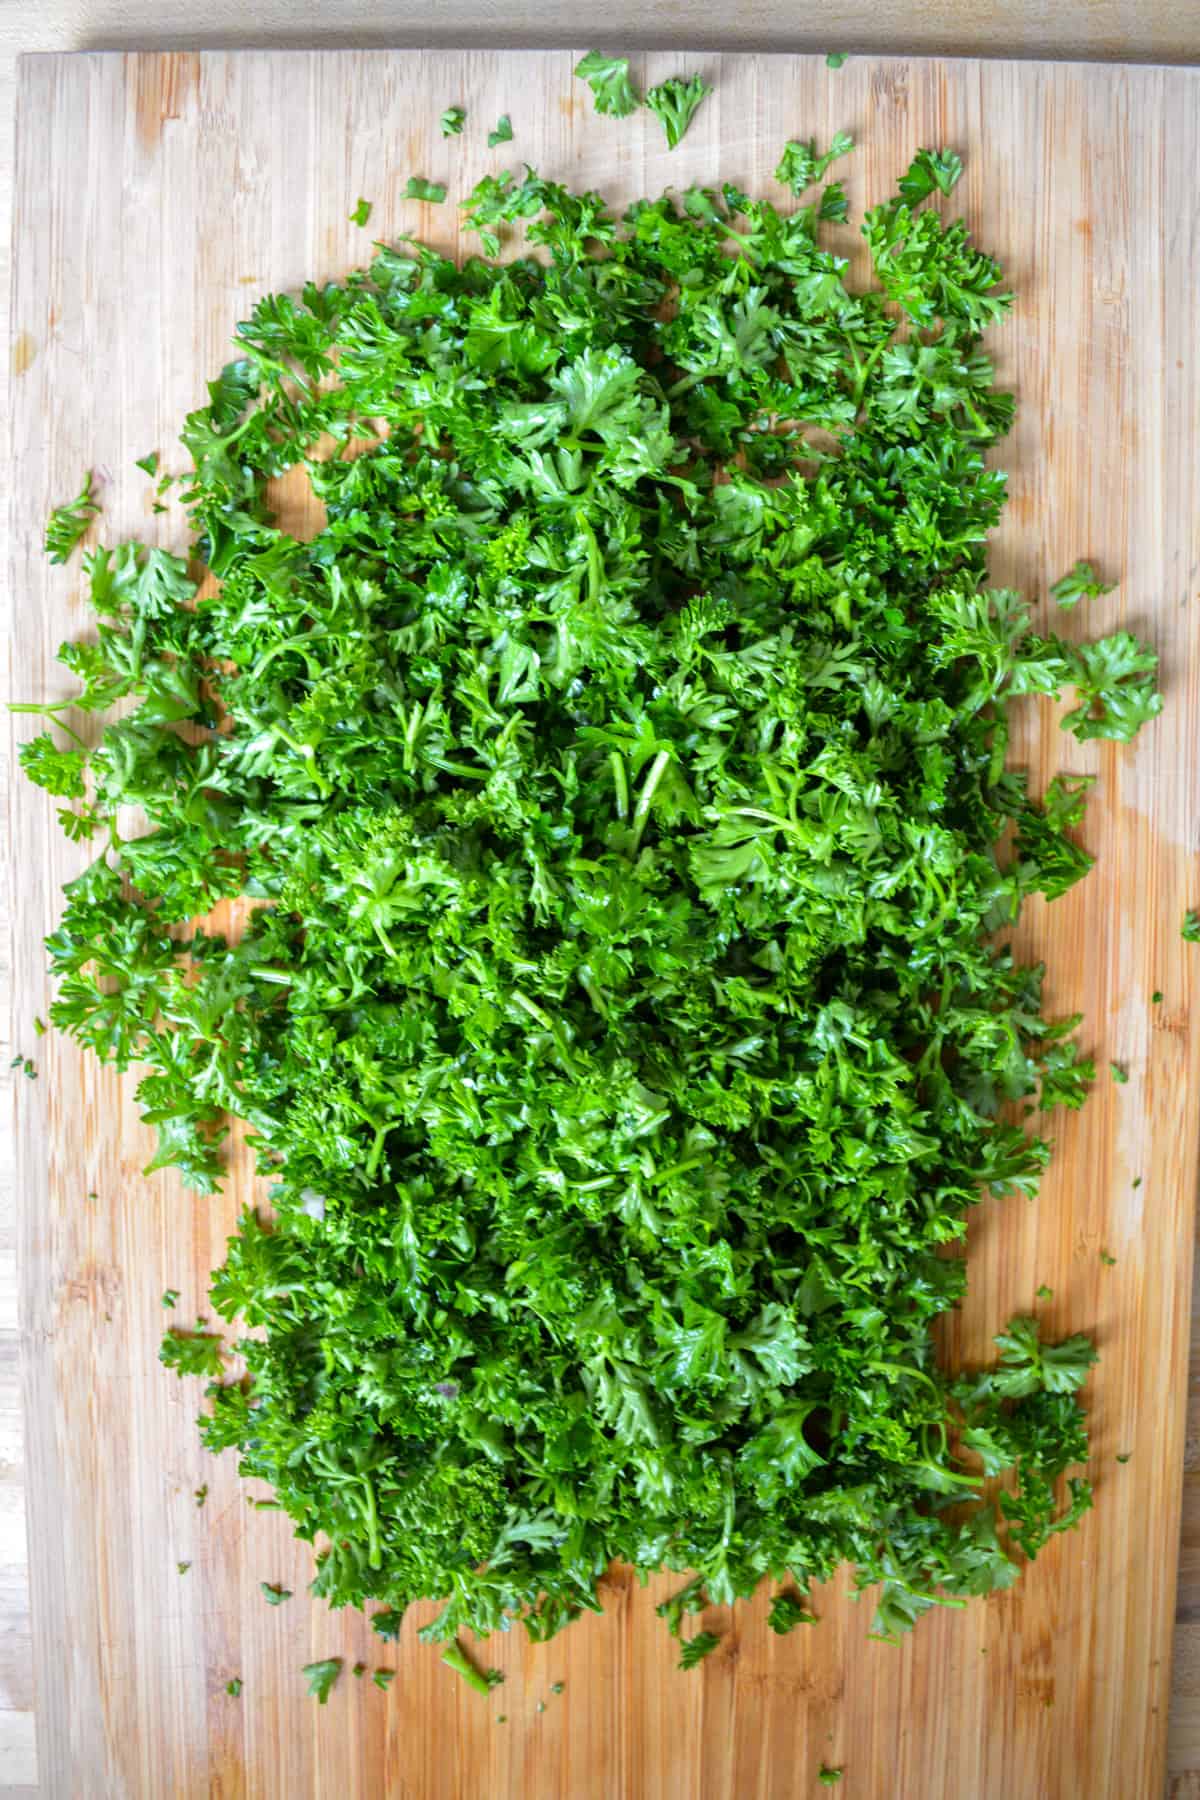 Chopped parsley on a wooden cutting board.